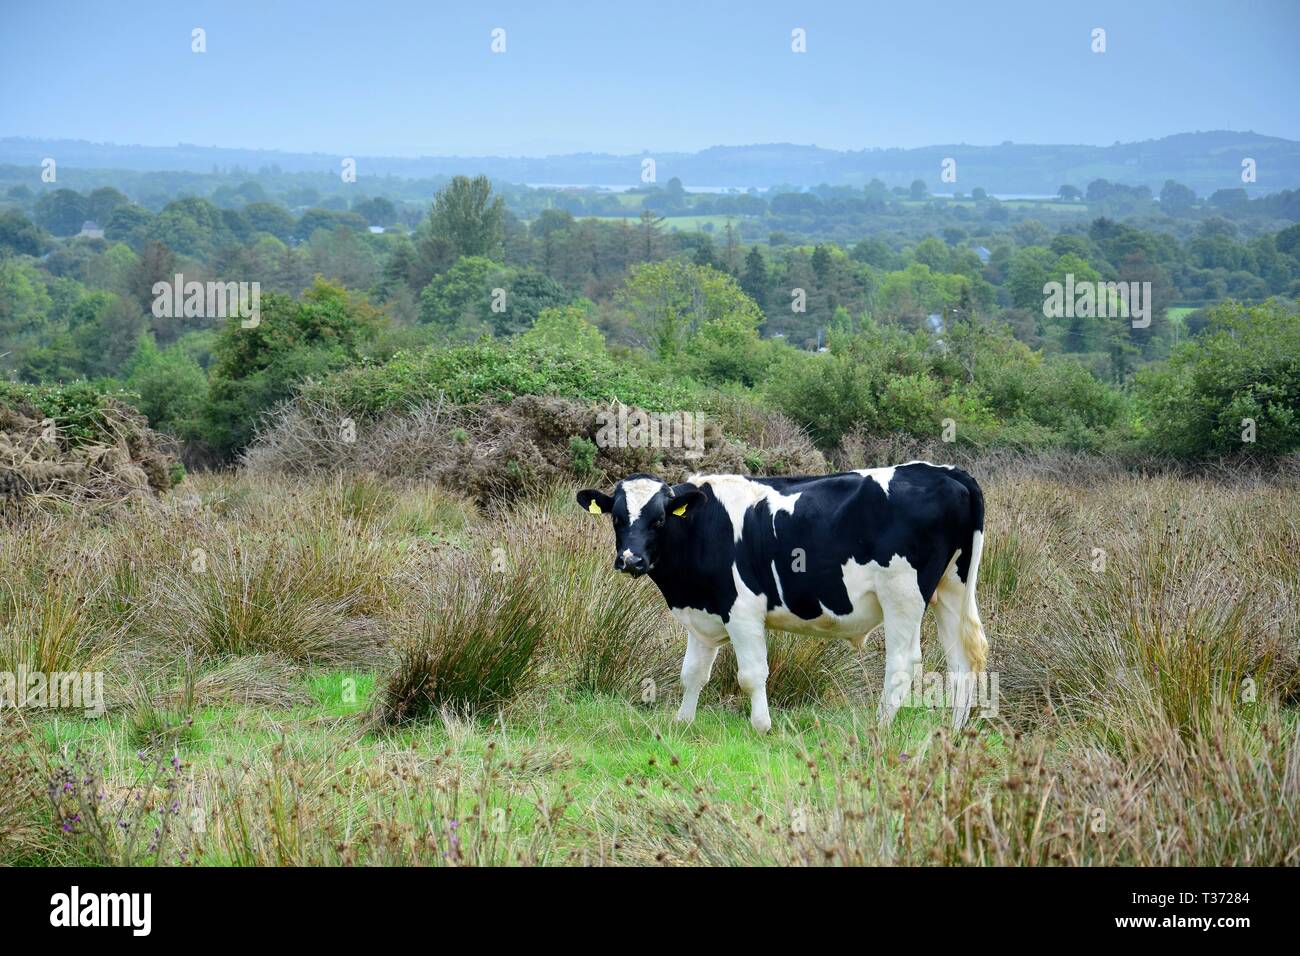 A black and white cattle on a meadow in Ireland with landscape in the background. Stock Photo